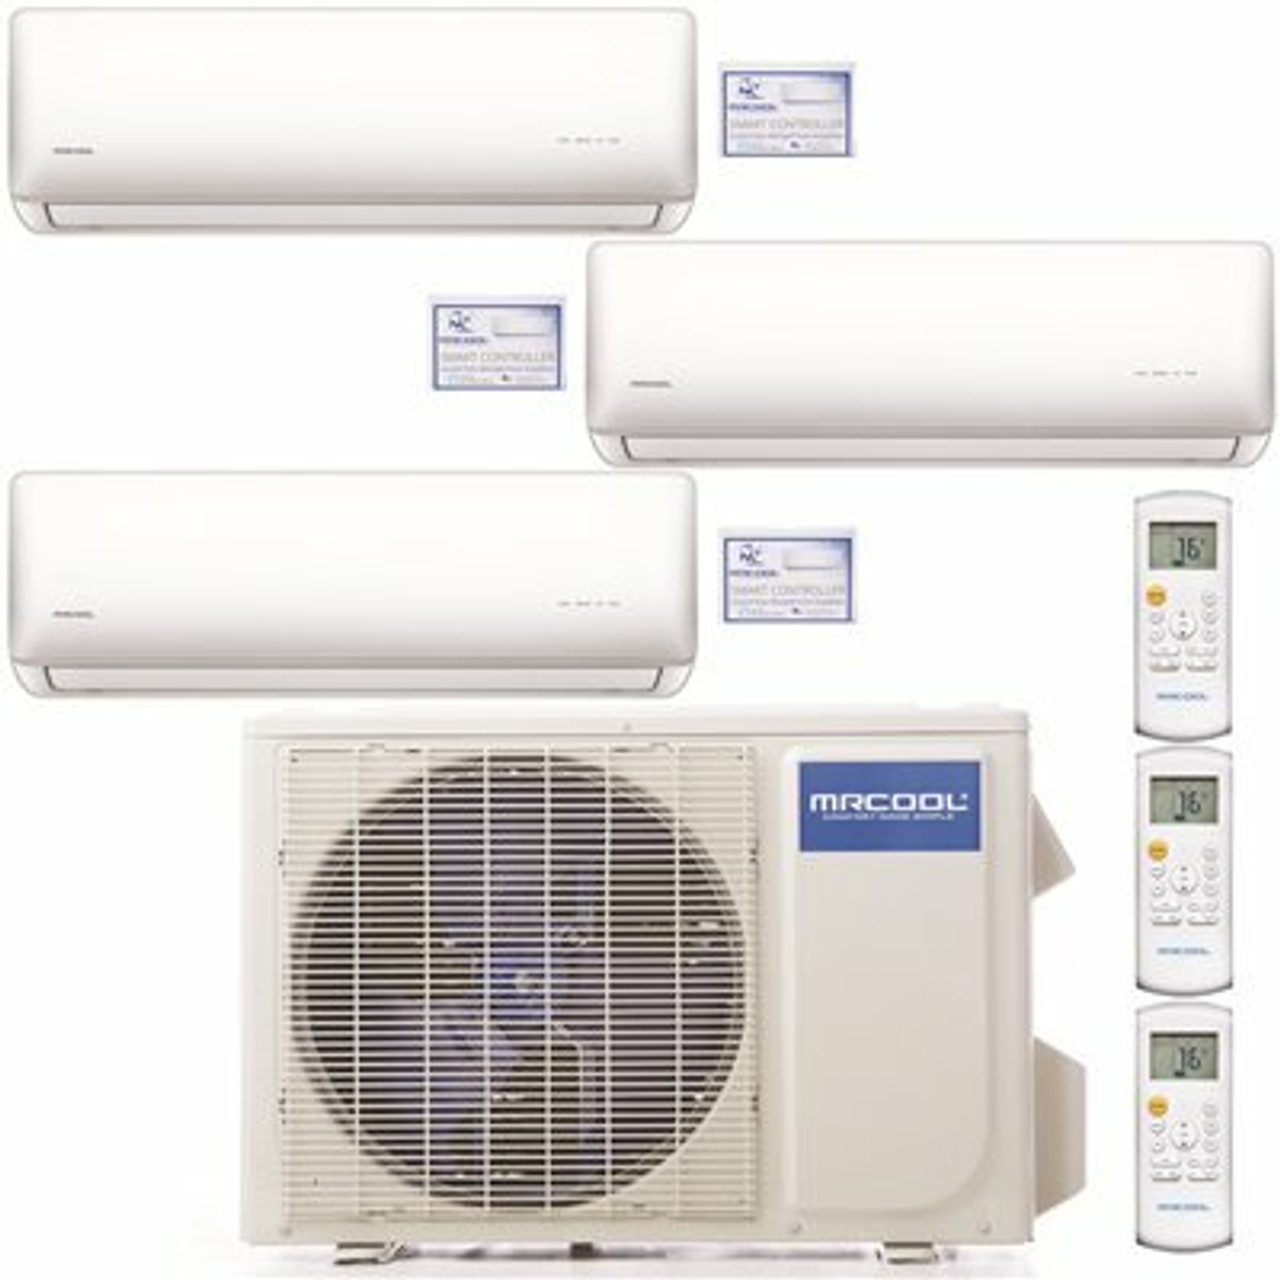 Mrcool Olympus 36,000 Btu 3 Ton 3-Zone Ductless Mini Split Air Conditioner And Heat Pump, 25 Ft. Install Kit - 230V/60Hz - 308810690